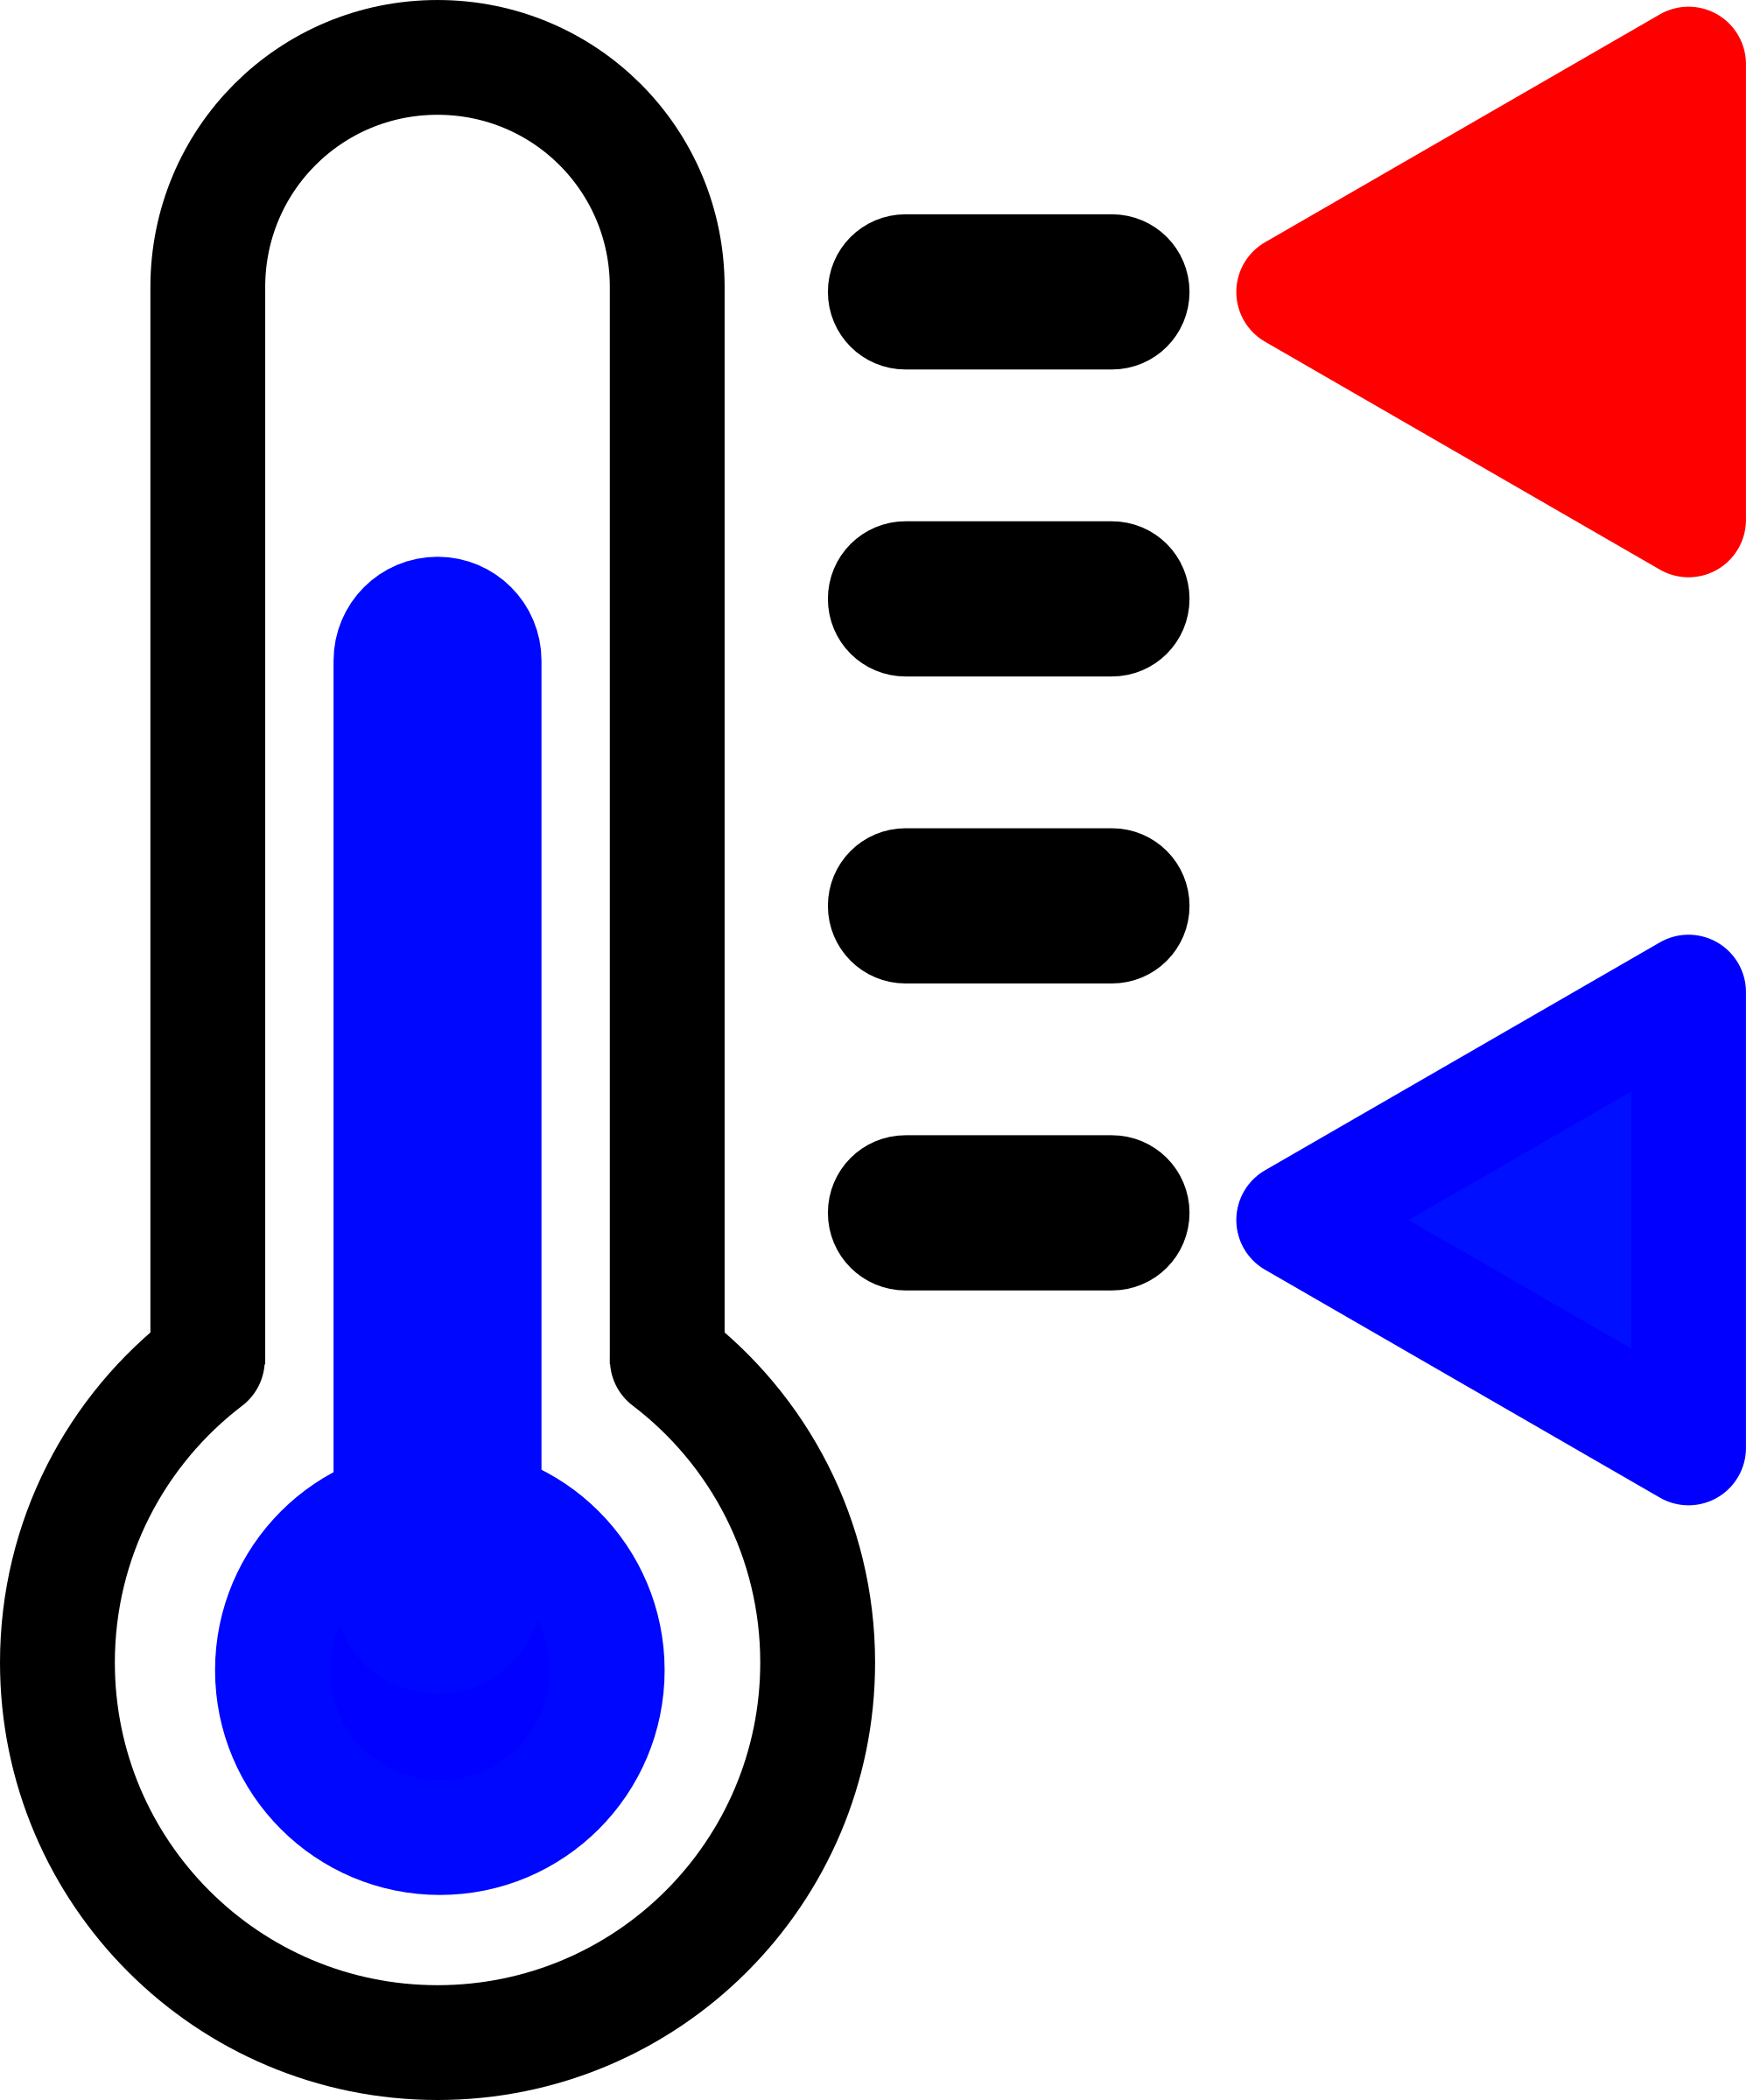  Clipart  Thermometer icon with min  max  indicator